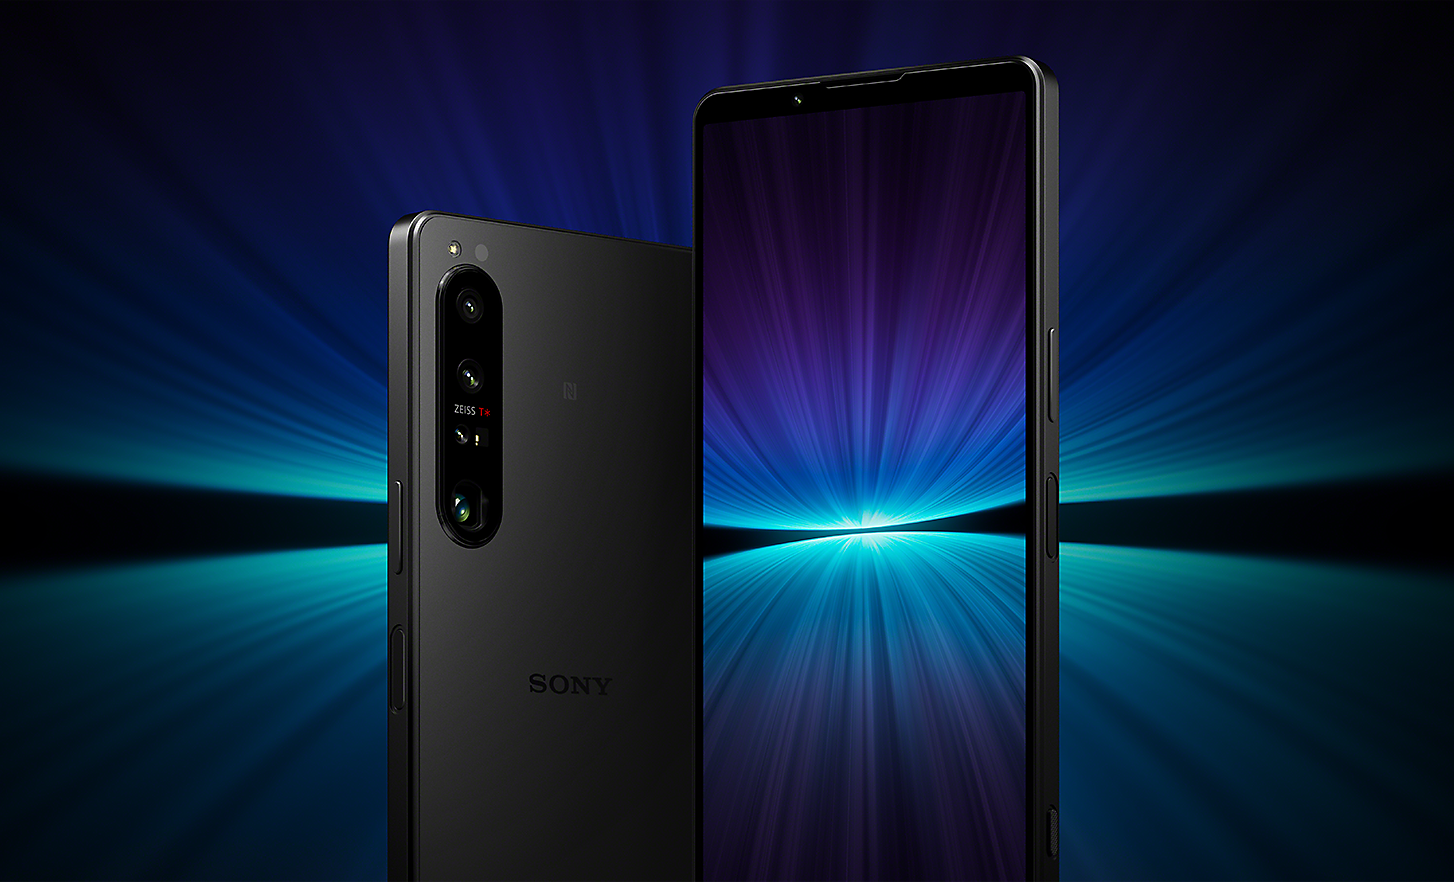 Xperia 1 IV | 4K HDR 120fps video recording with a 4K HDR OLED display